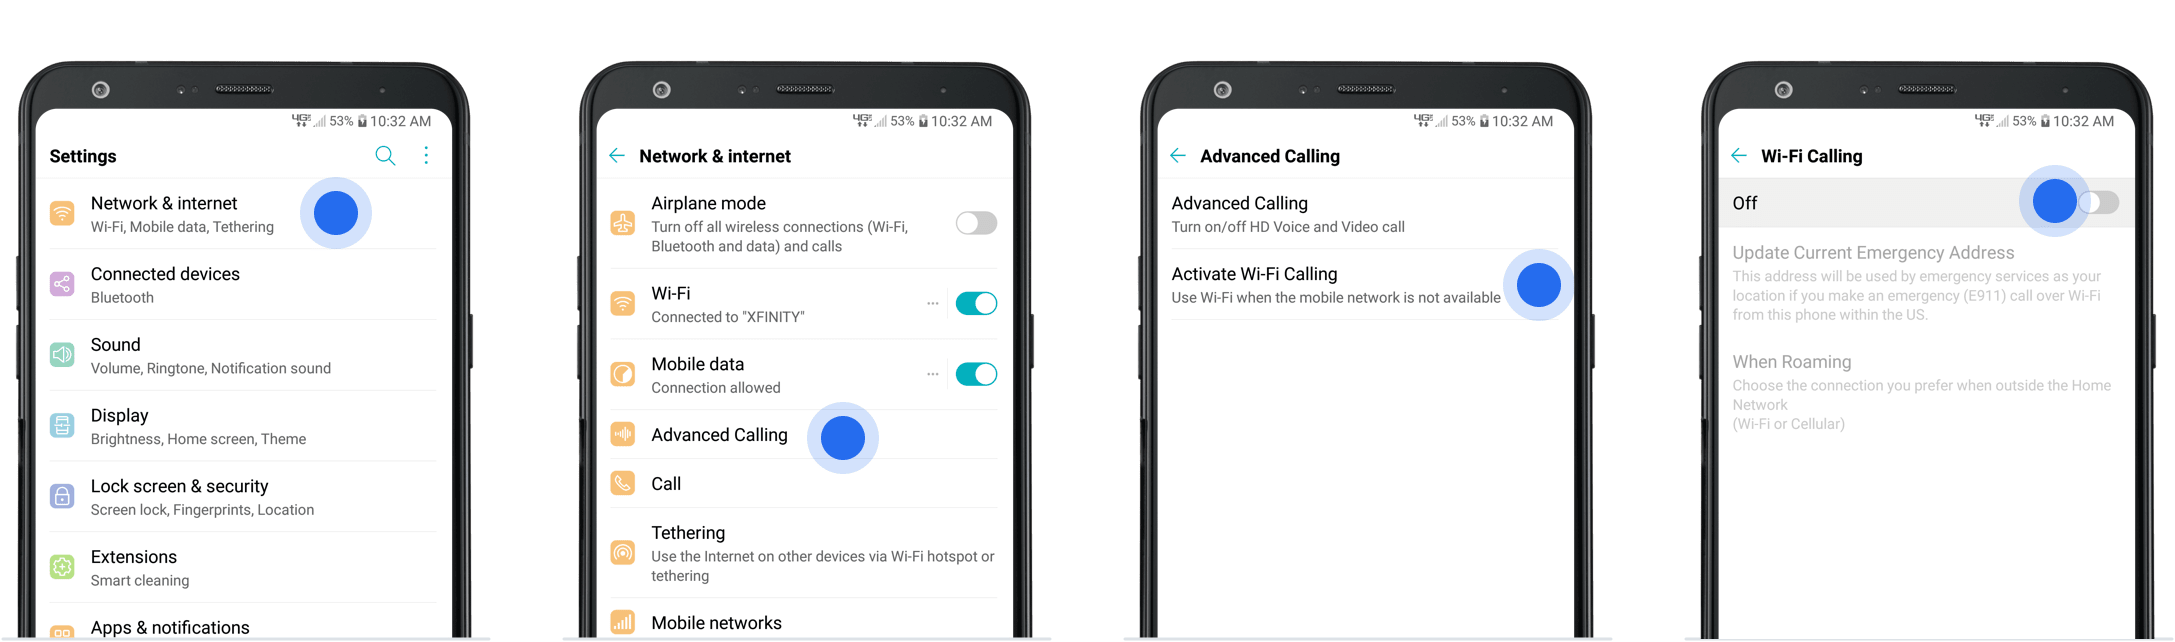 How Do I Use Wifi Calling On An Android Device